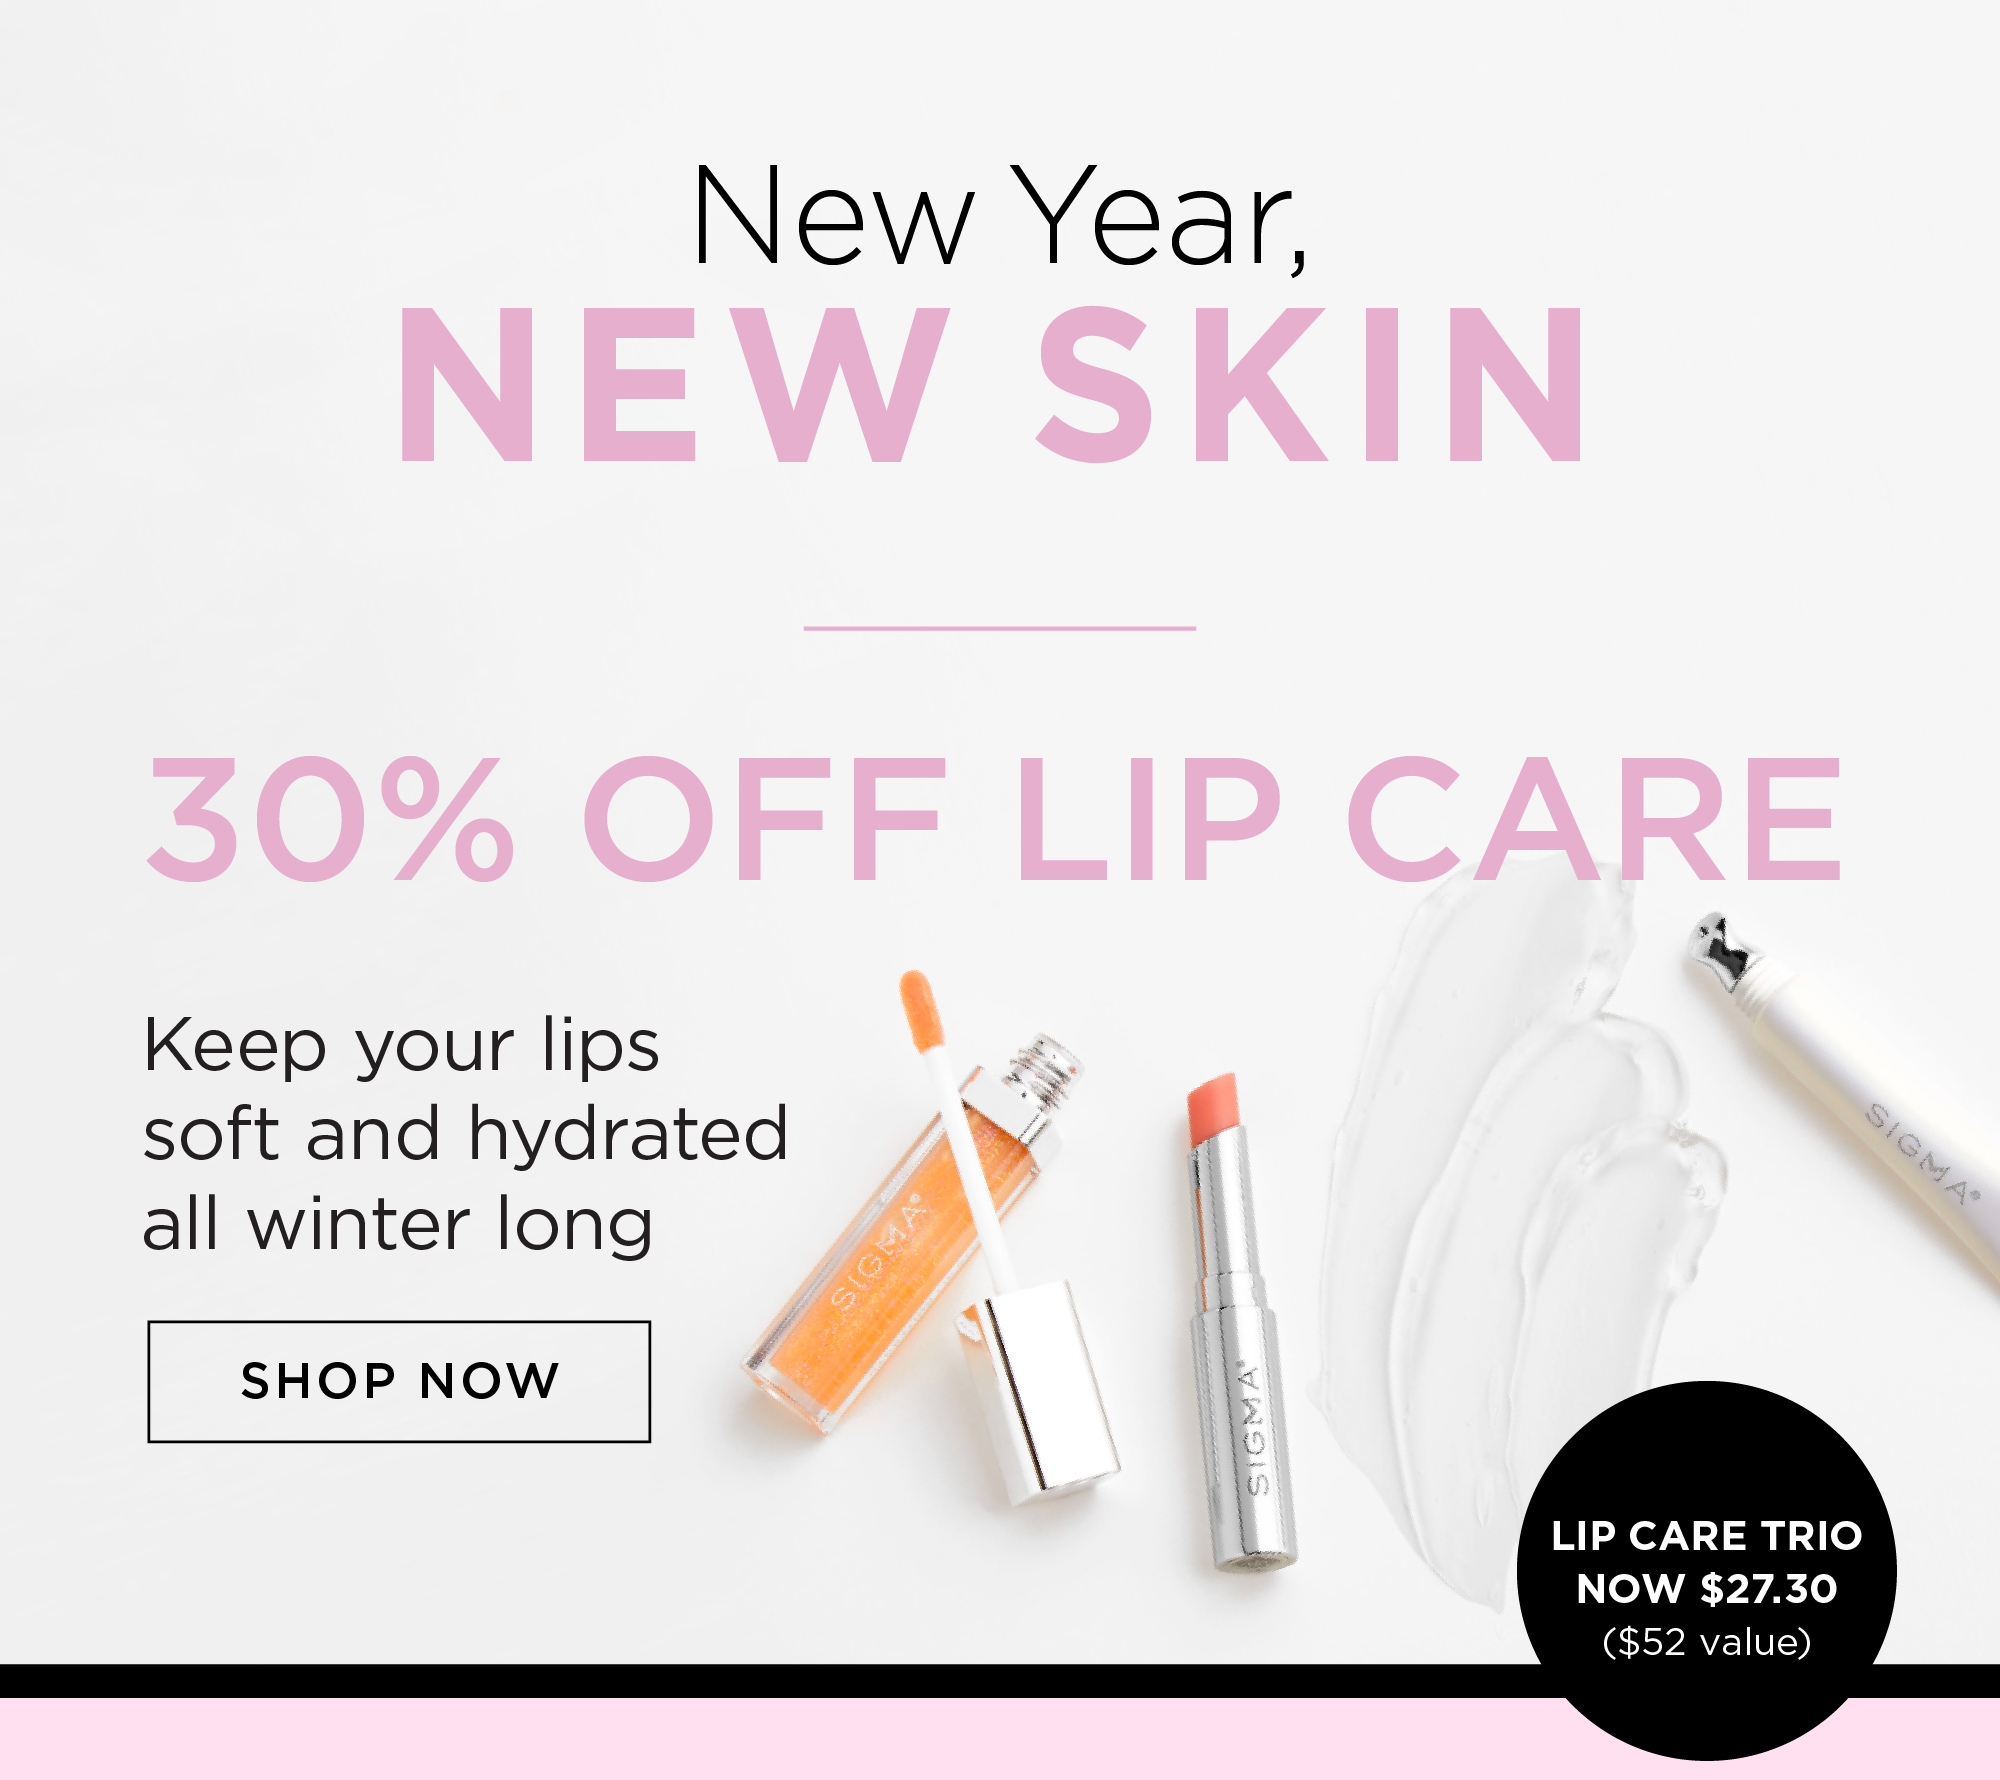 New Year New Skin – 30% Off Lip Care